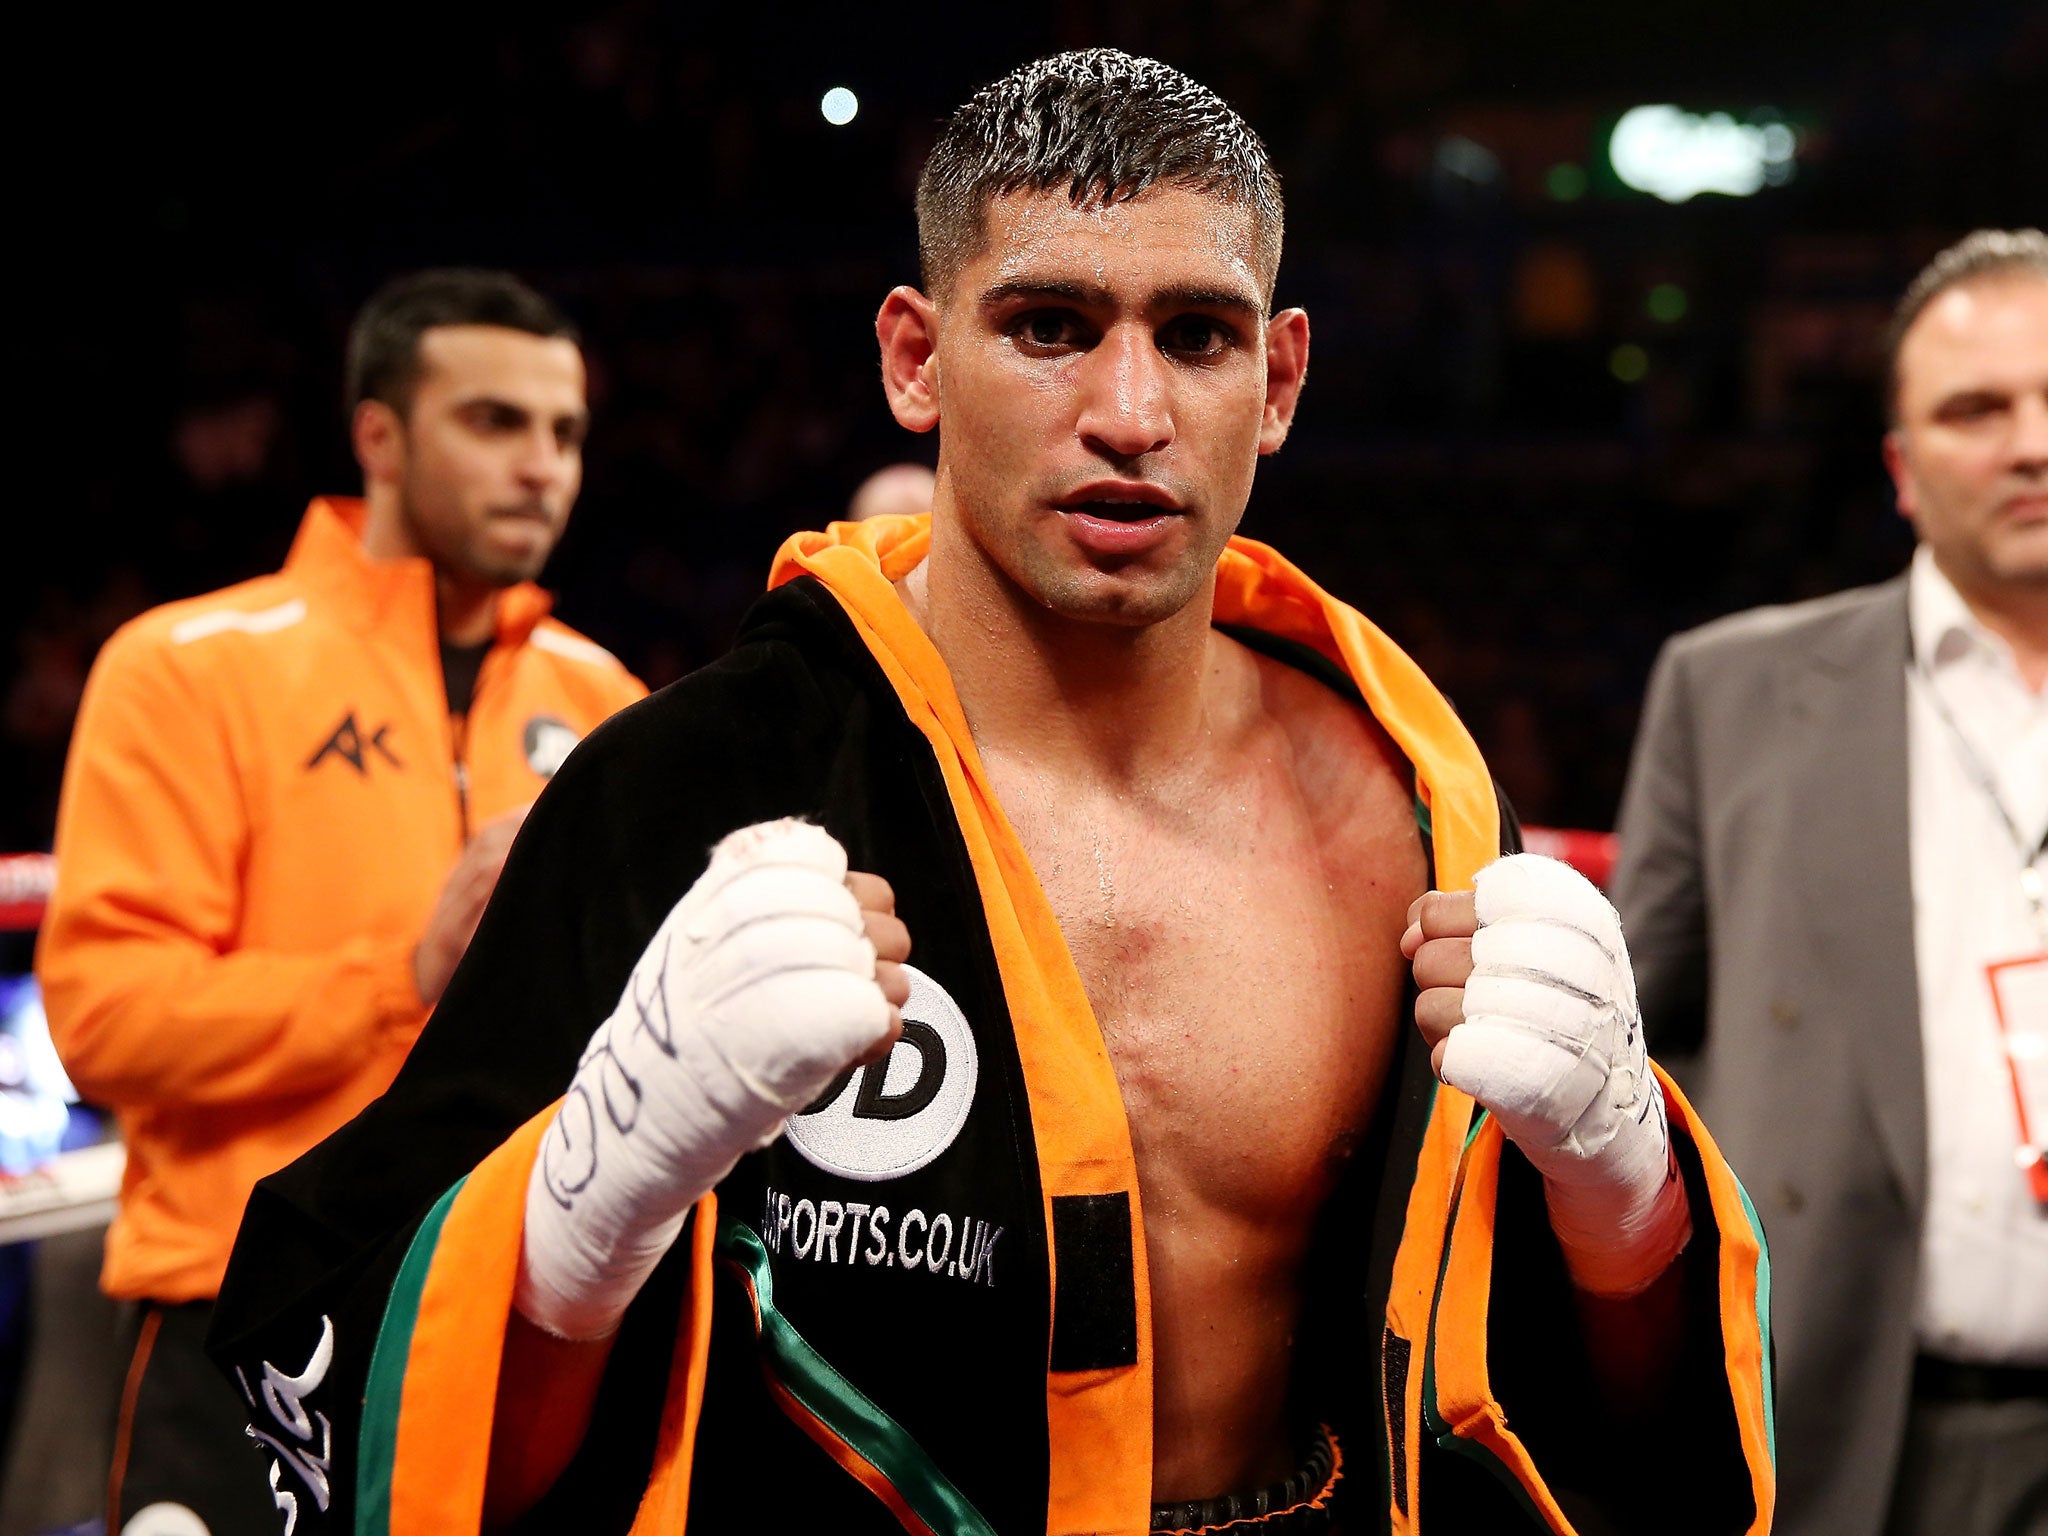 Amir Khan will find out in the next two weeks if he has secured a fight with Floyd Mayweather